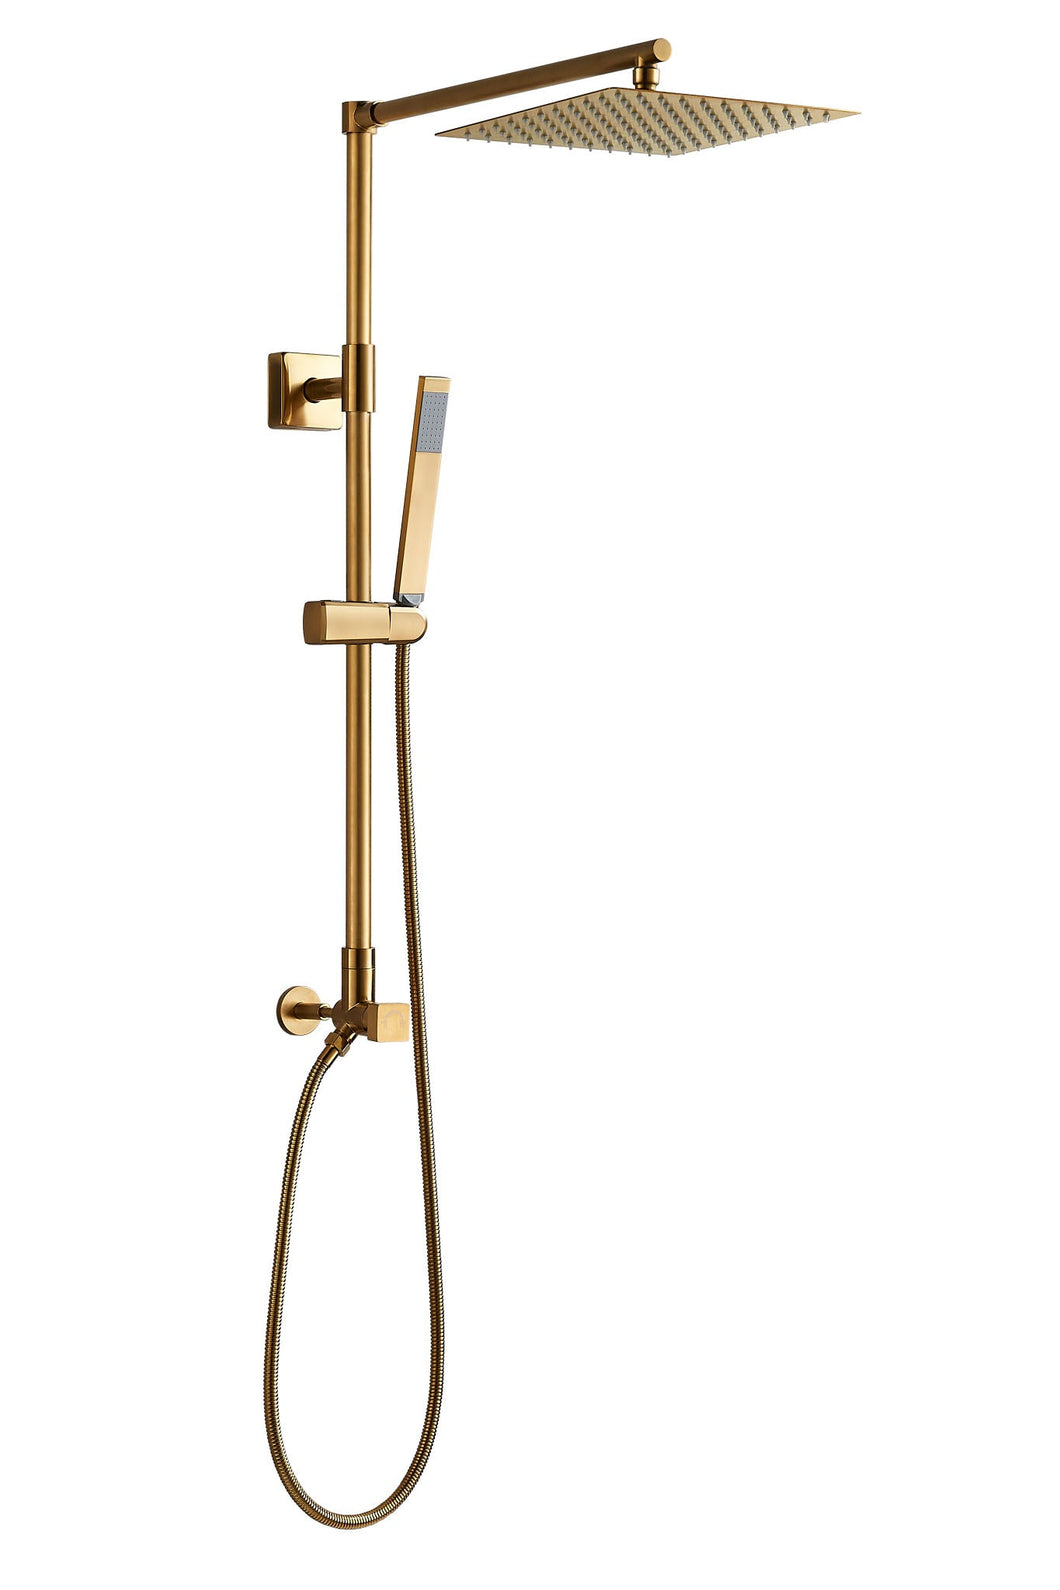 Brushed gold square rain shower head with hose and a slim, metal-made handheld shower. 10